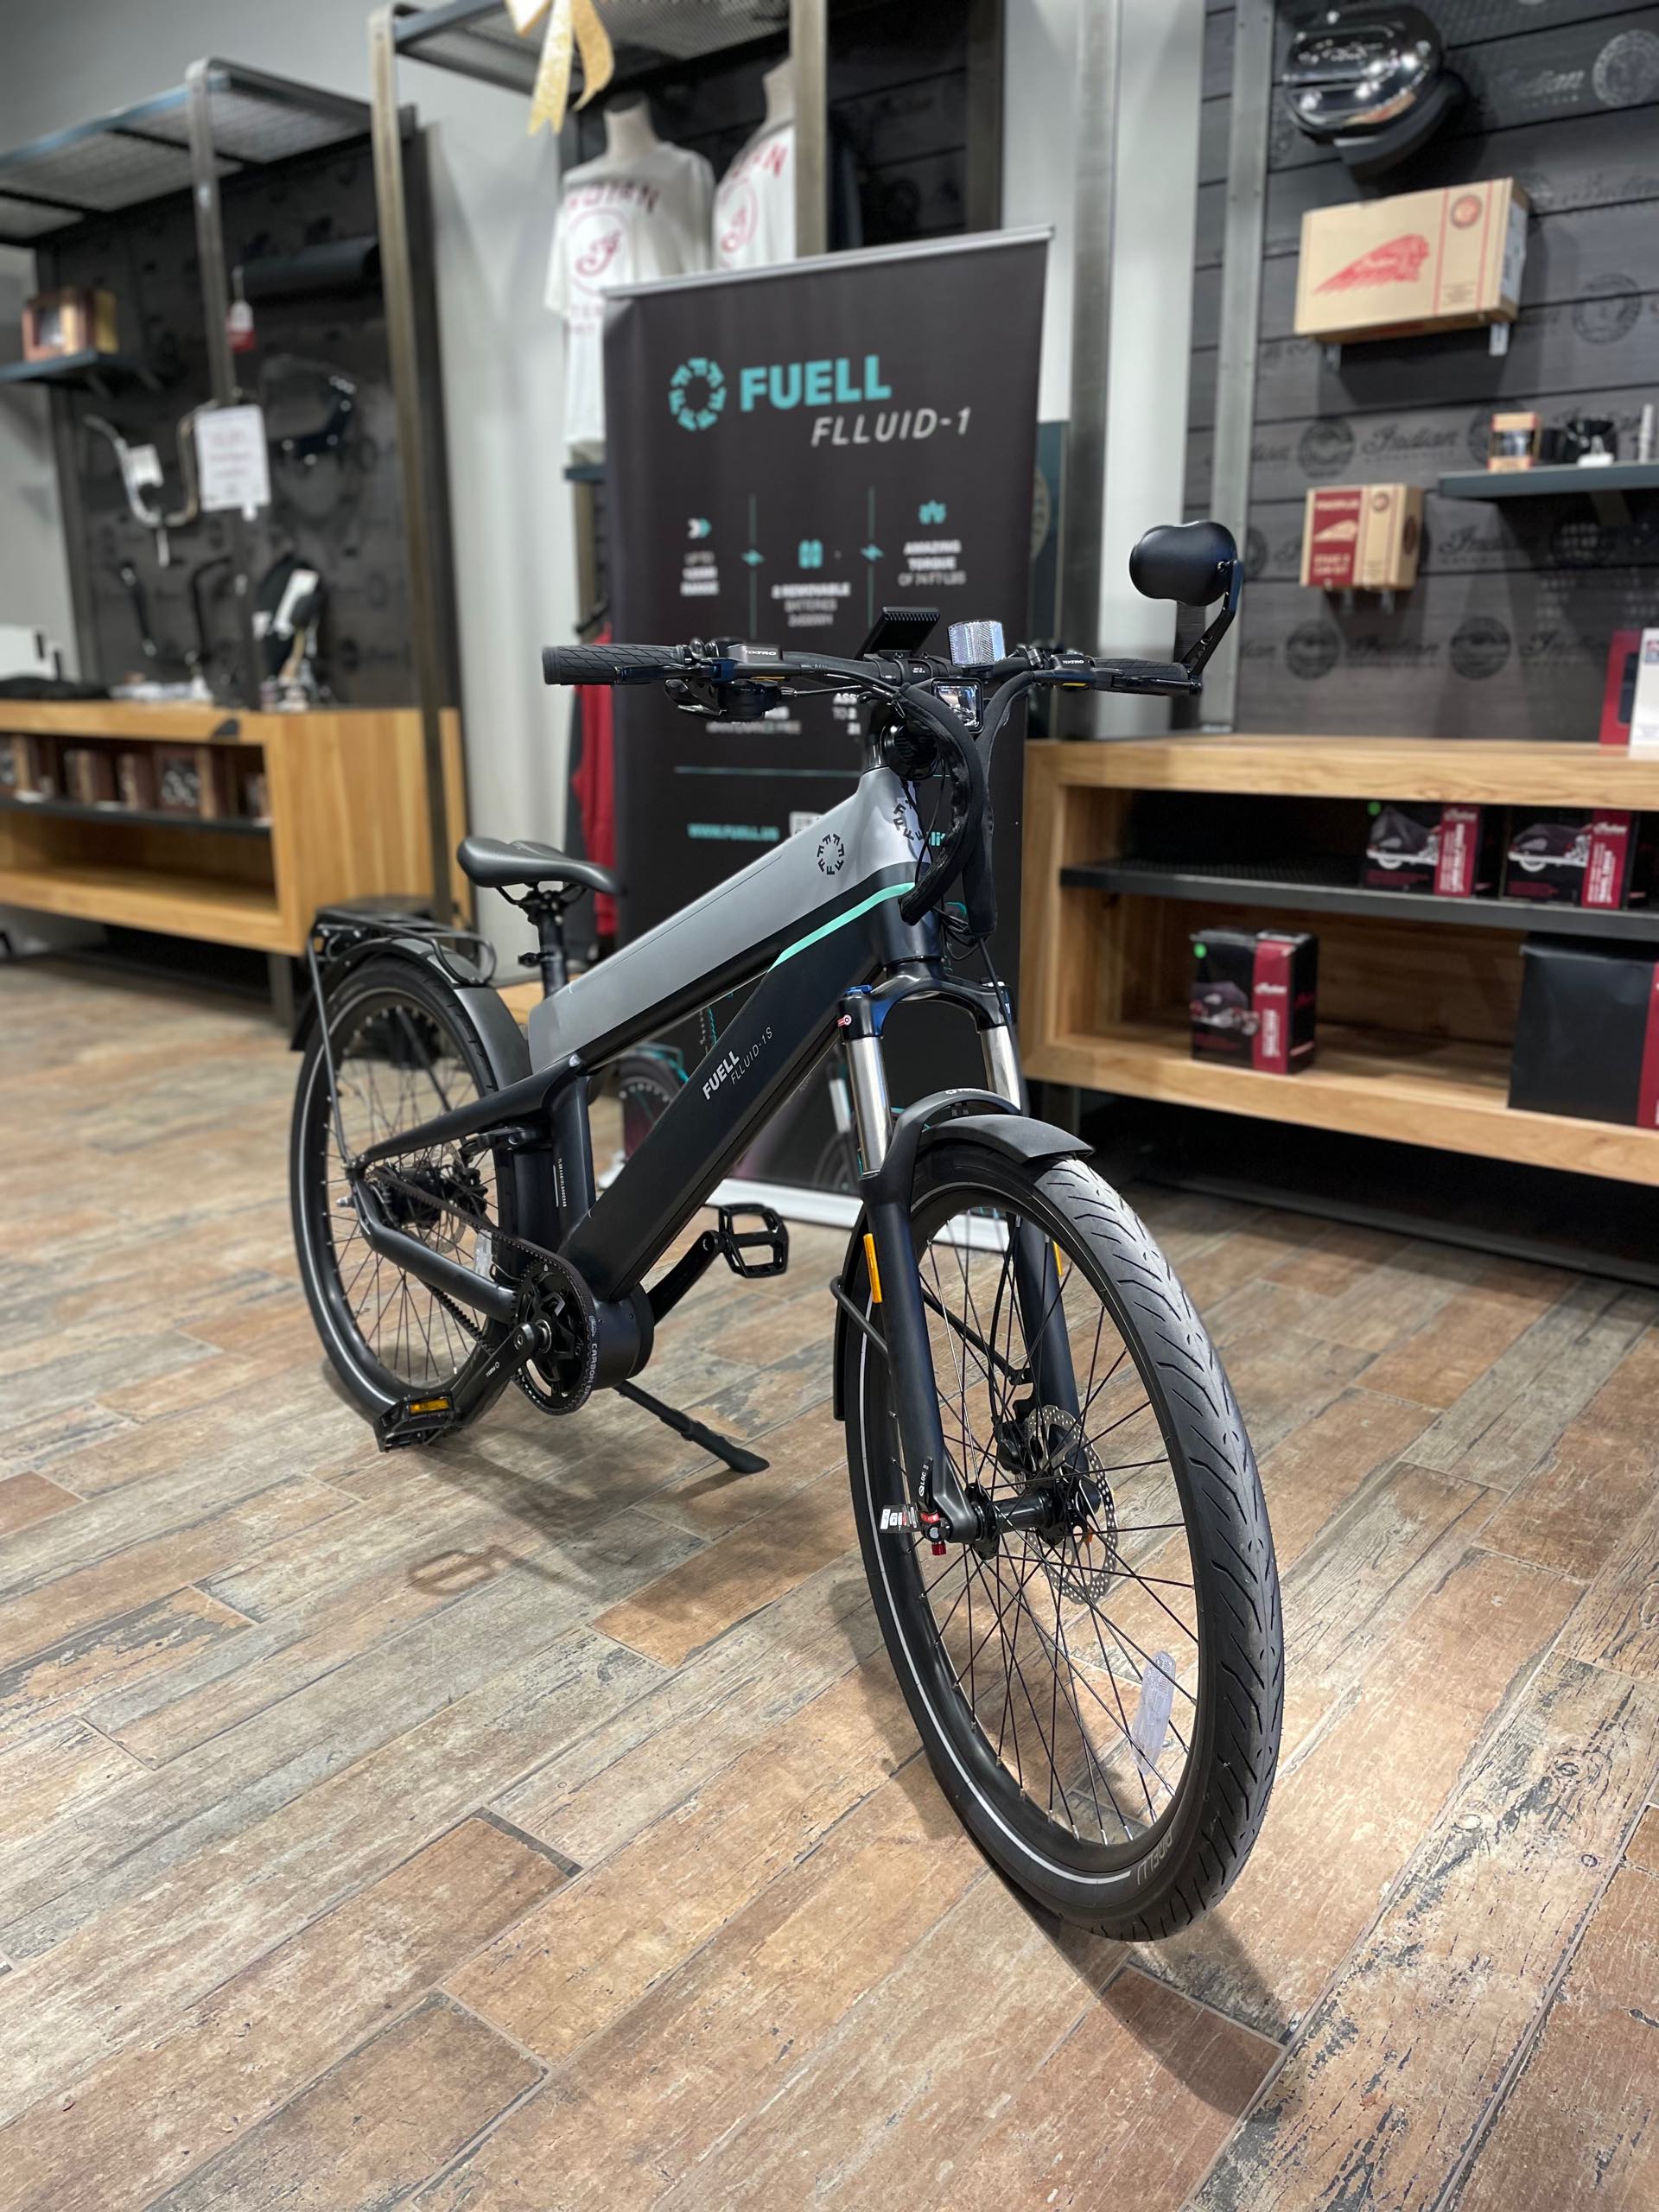 2021 Fuell Fuell 1S DK GY - MED at Pitt Cycles